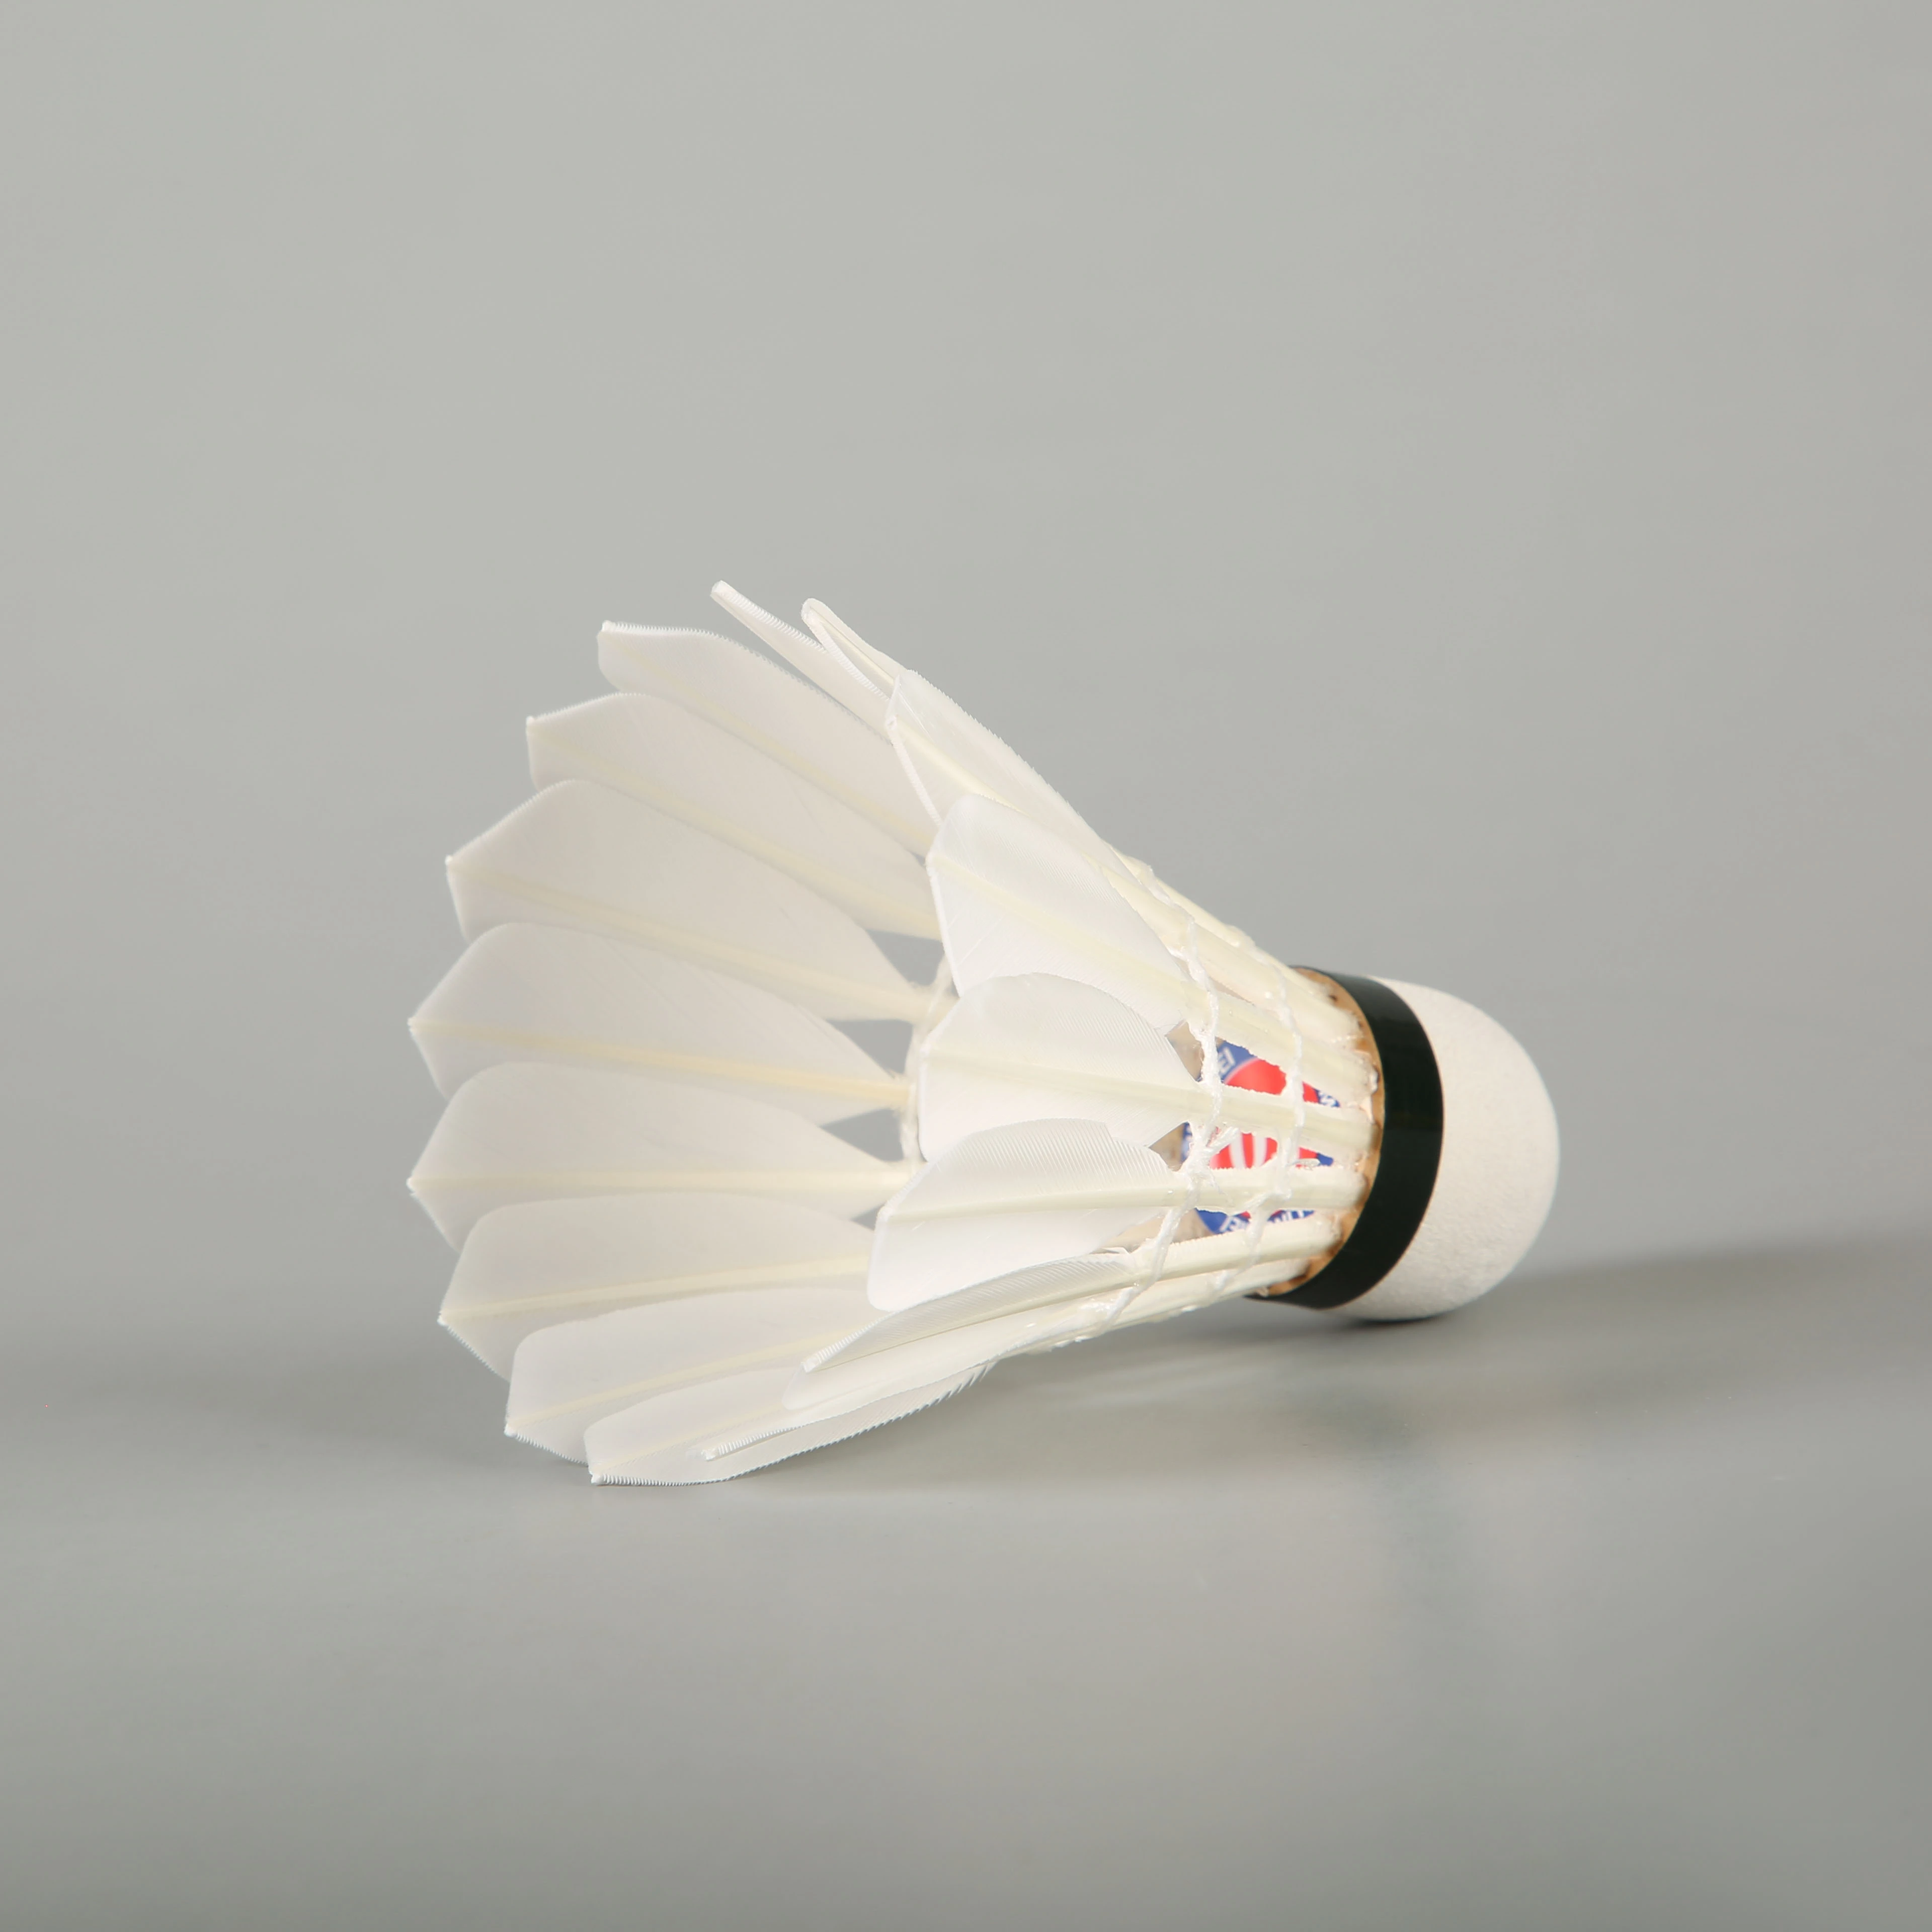 2021 most durable and stable badminton shuttlecock with original feather